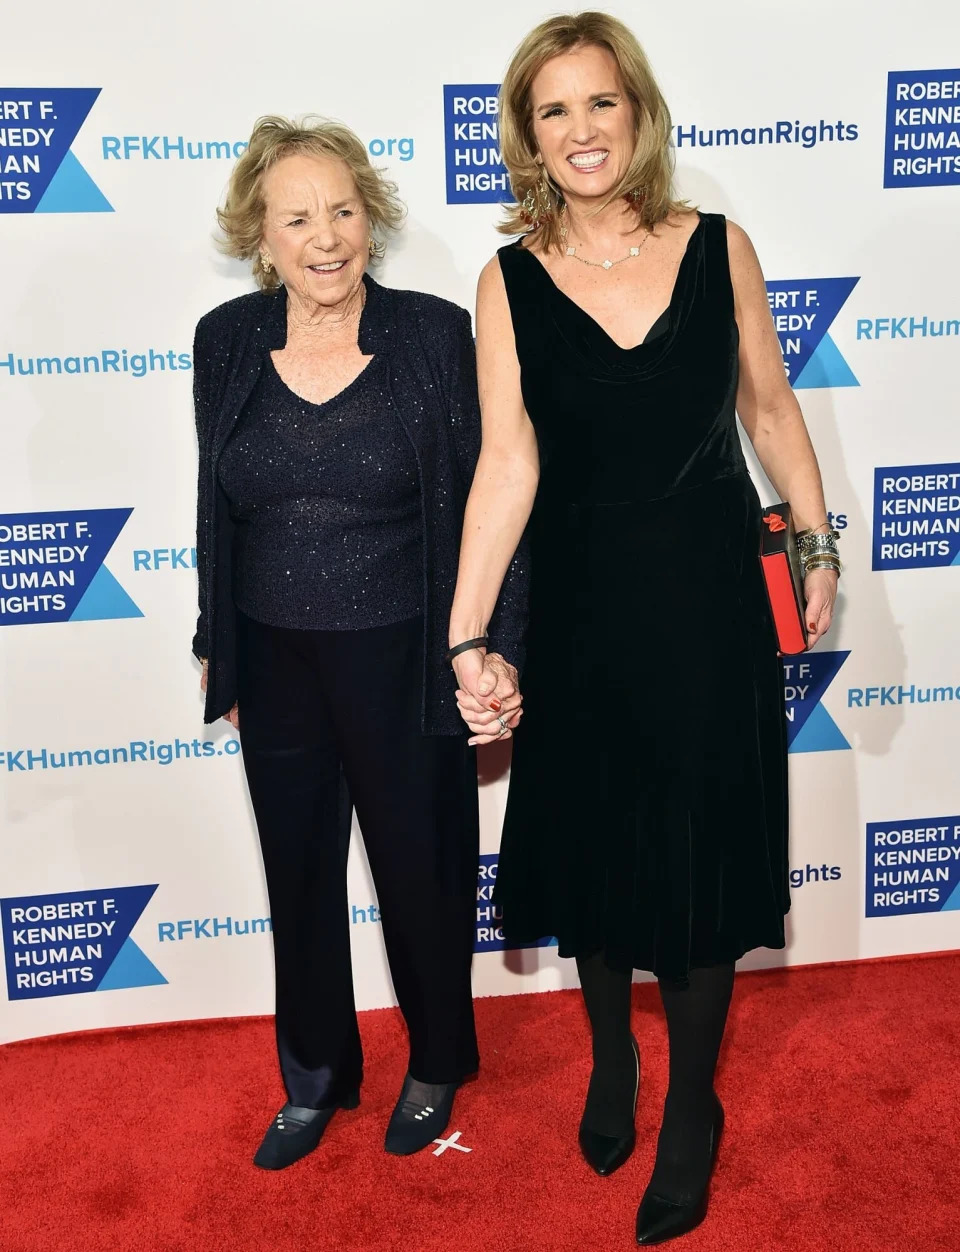  Ethel Kennedy (left) and Kerry Kennedy (right)